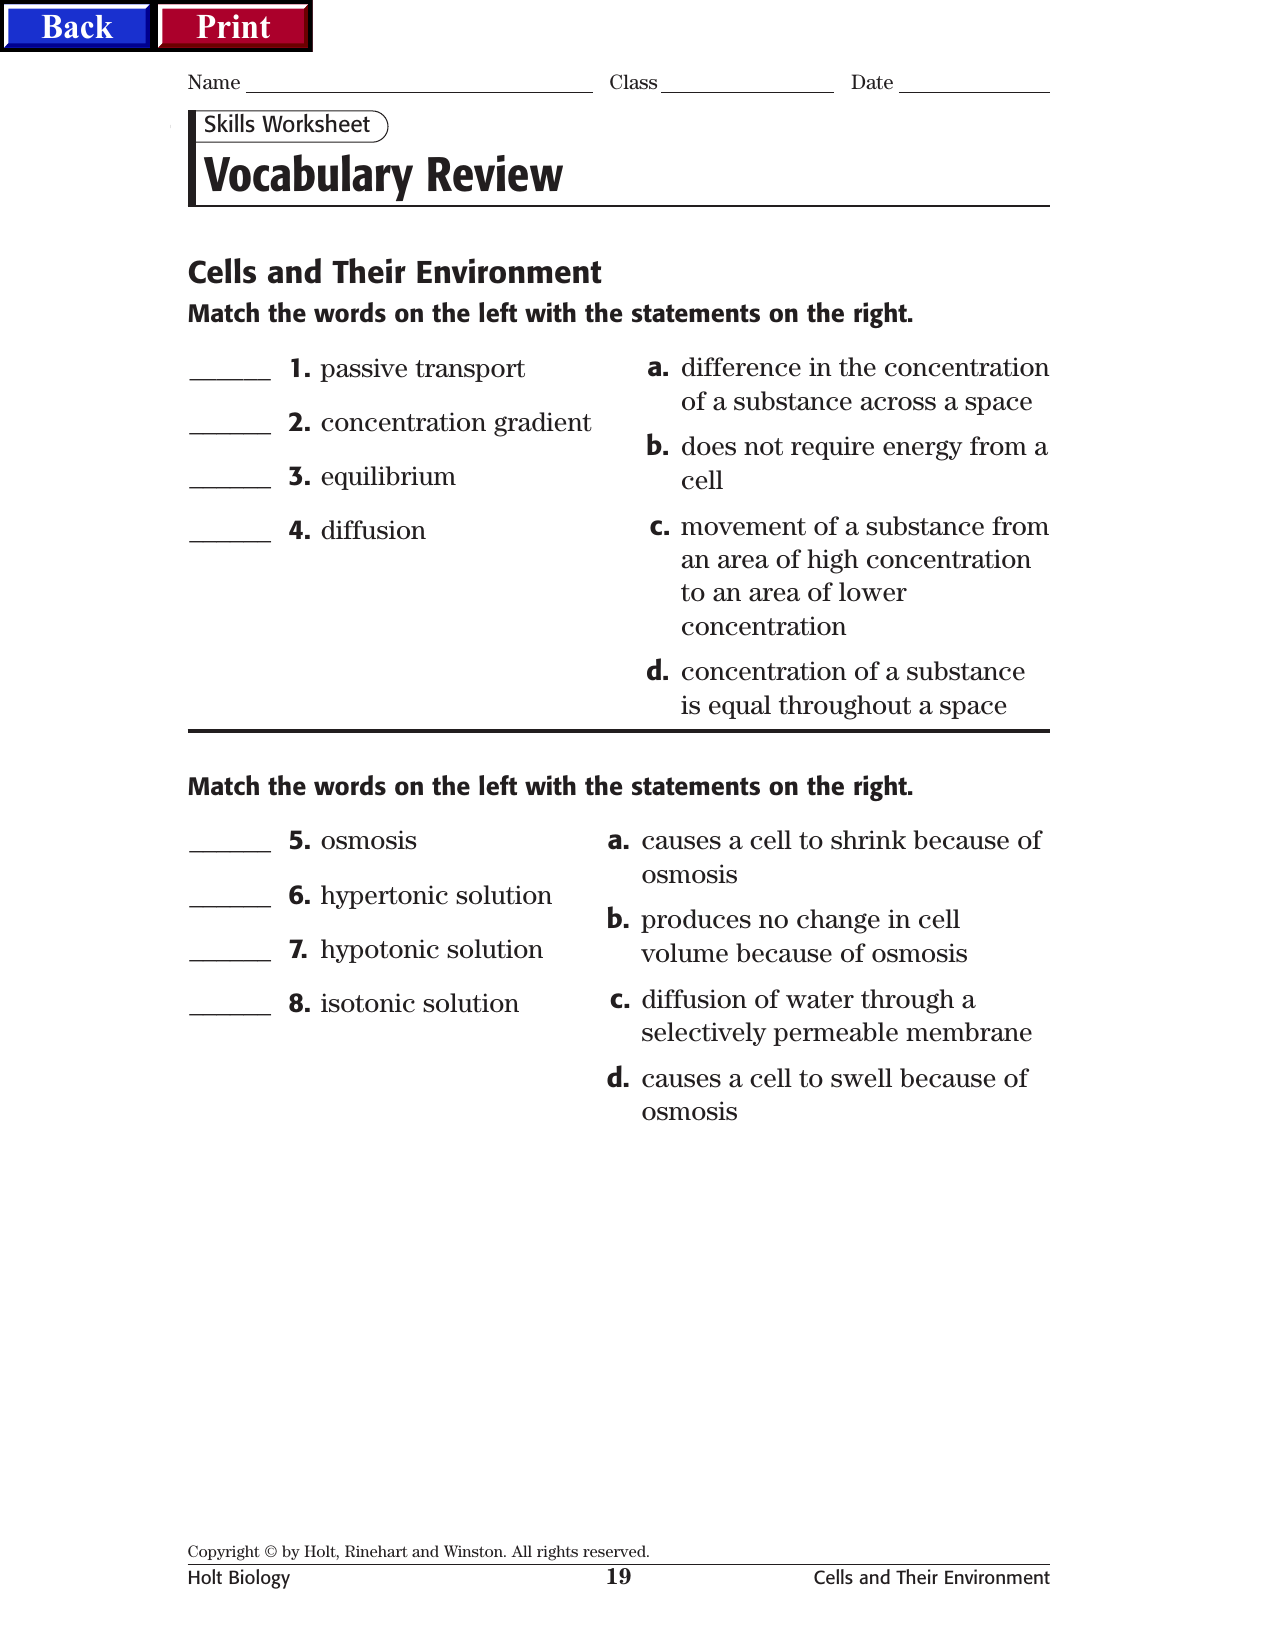 skills-worksheet-vocabulary-review-biology-free-download-qstion-co